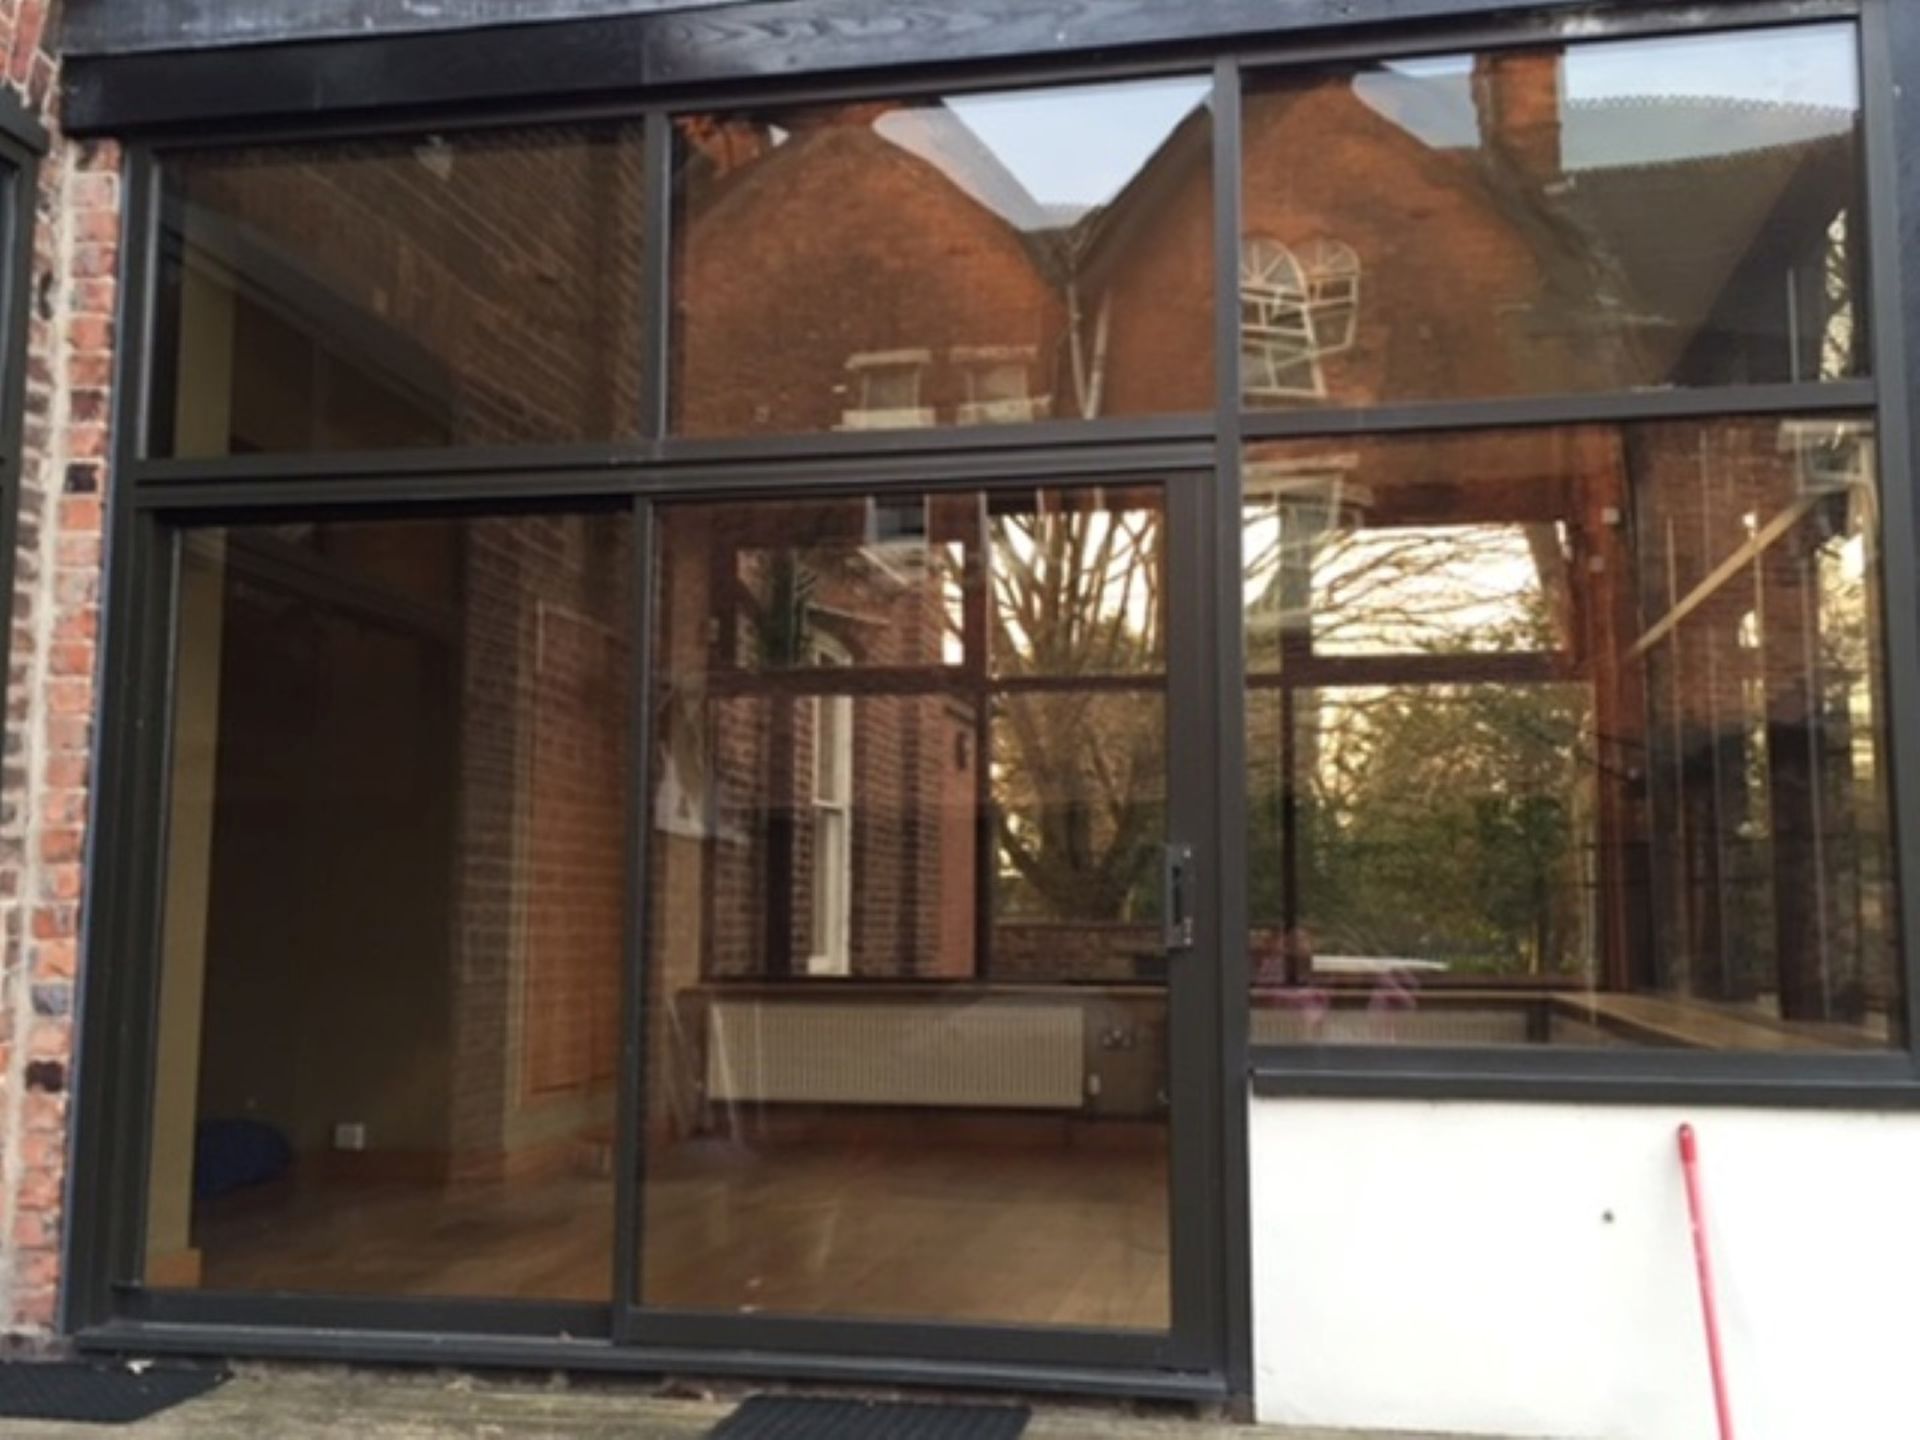 1 x Aluminium Framed Conservatory With Double Glazed Glass Panels - See Listing Details For